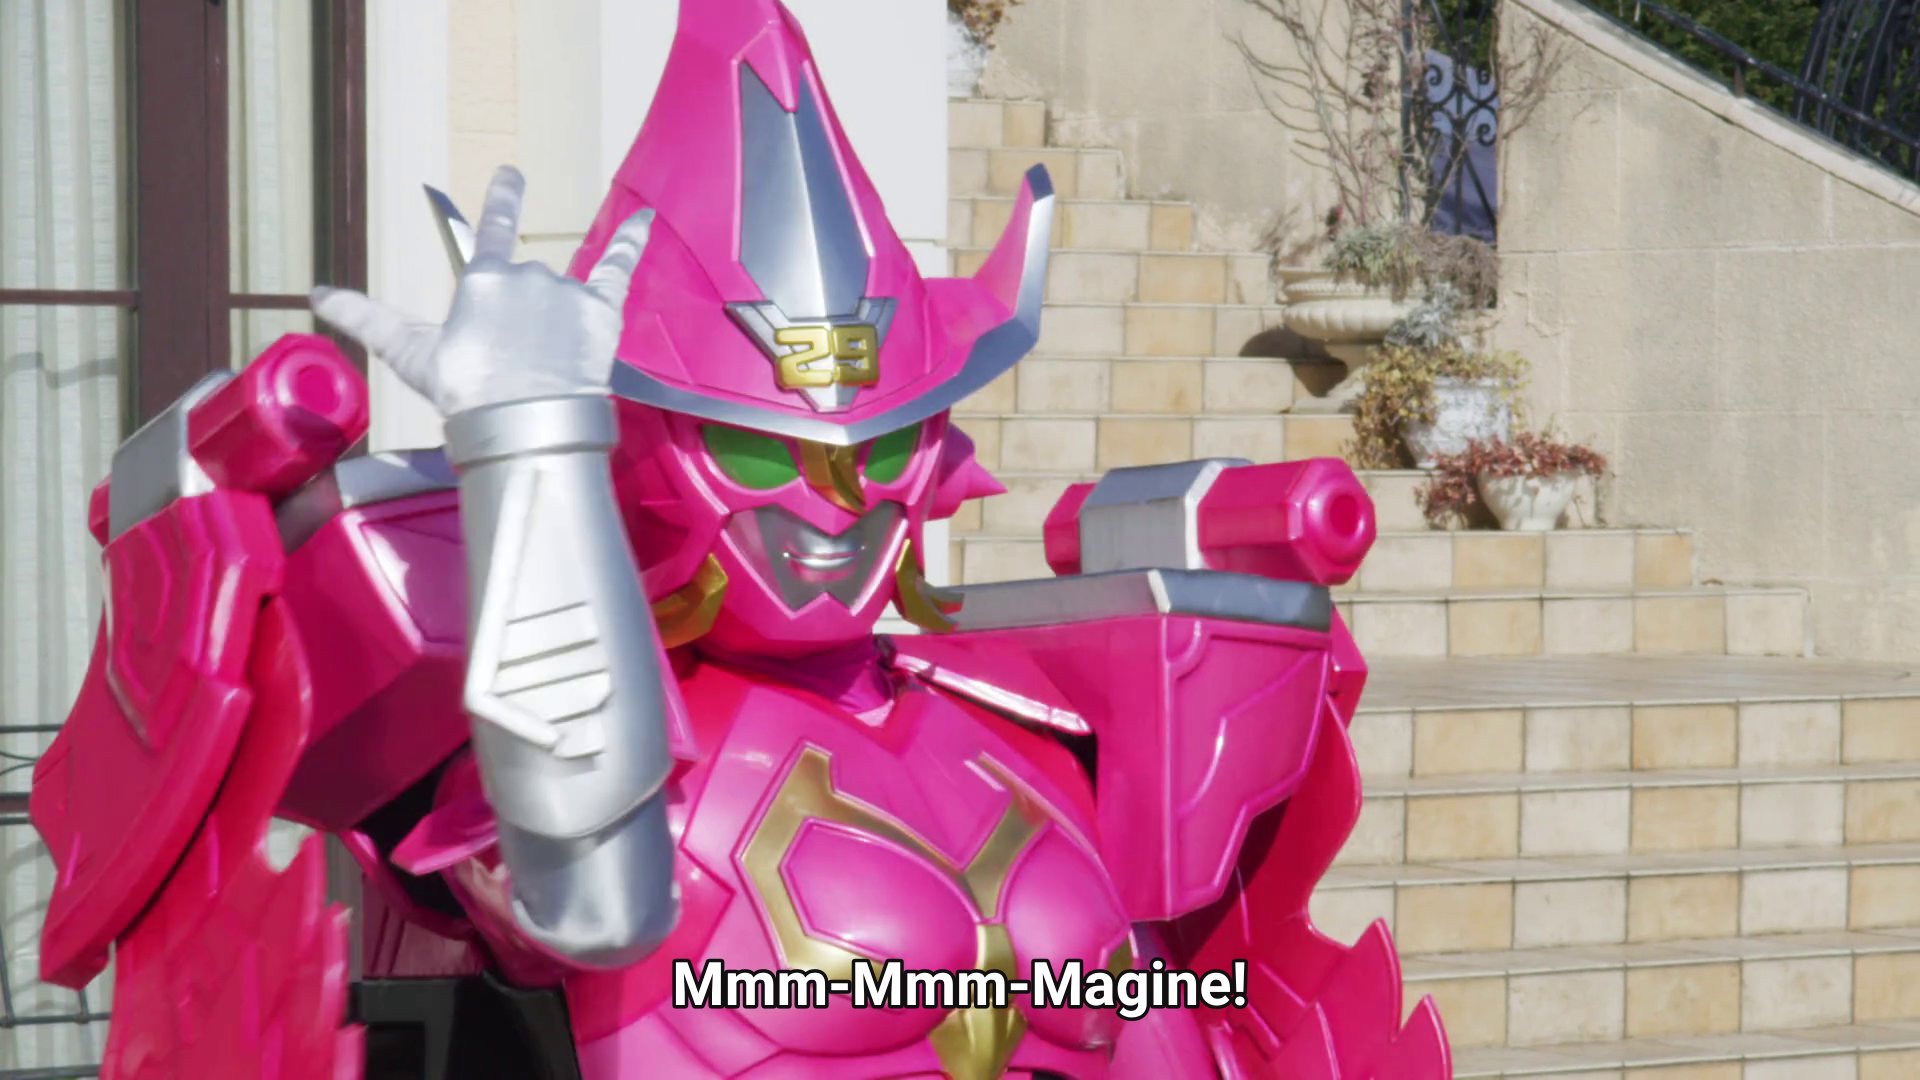 Magine, a pink mage themed robot: Mmm-mmm-magine!